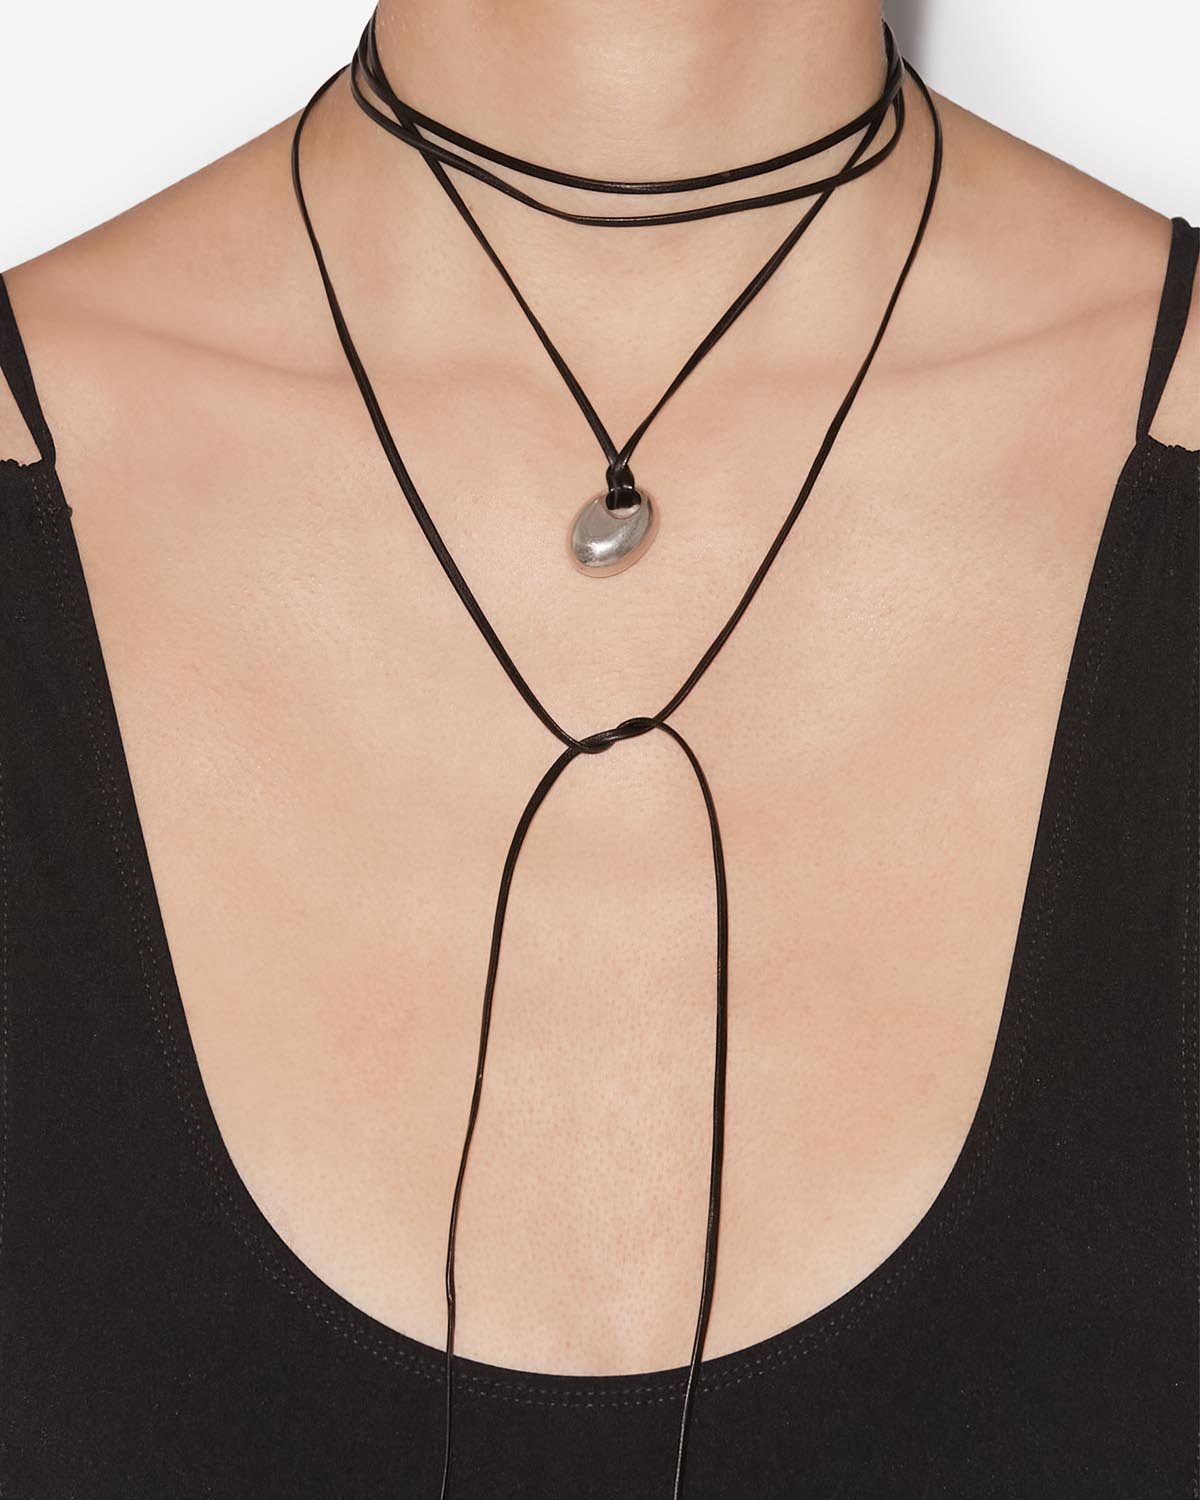 Aoi necklace Woman Black and silver 2